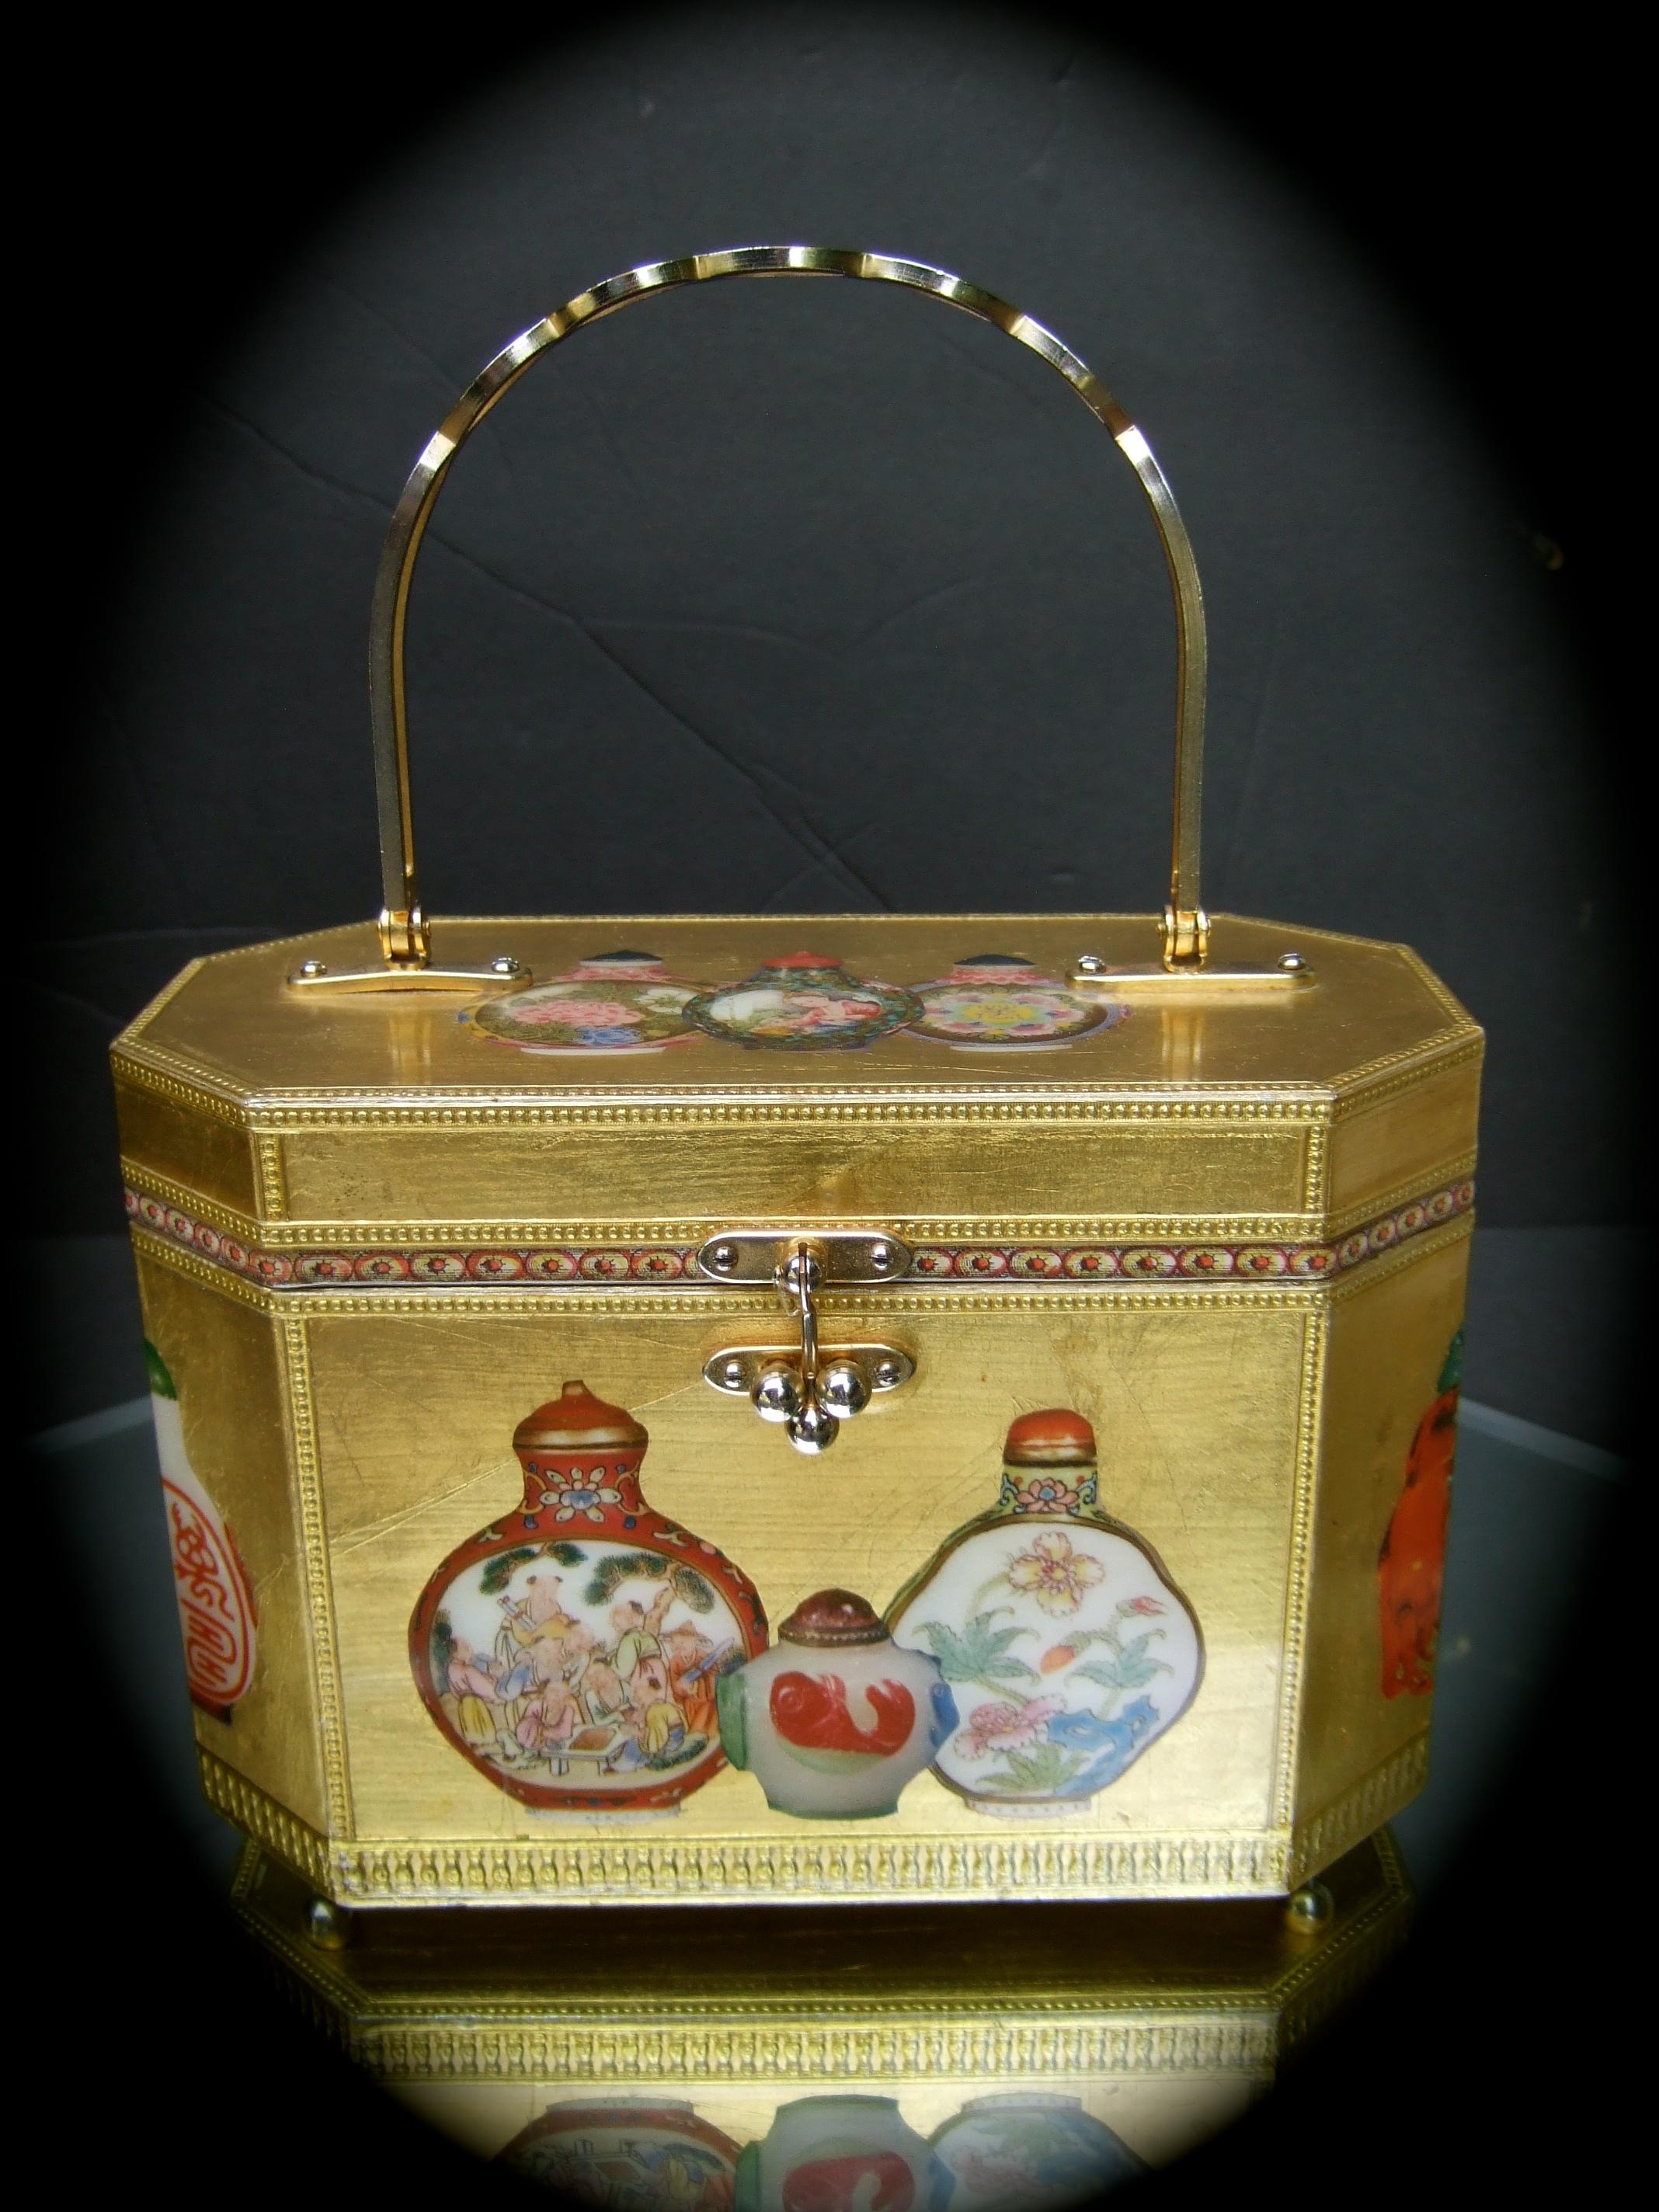 Saks Fifth Avenue Chinoiserie gilt wood decoupage box purse c 1970s
The elegant octagon shaped wood box purse is covered with luminous
gold enamel lacquer 

Decorated with decoupage Asian snuff bottles on the exterior 
Carried with a gilt metal